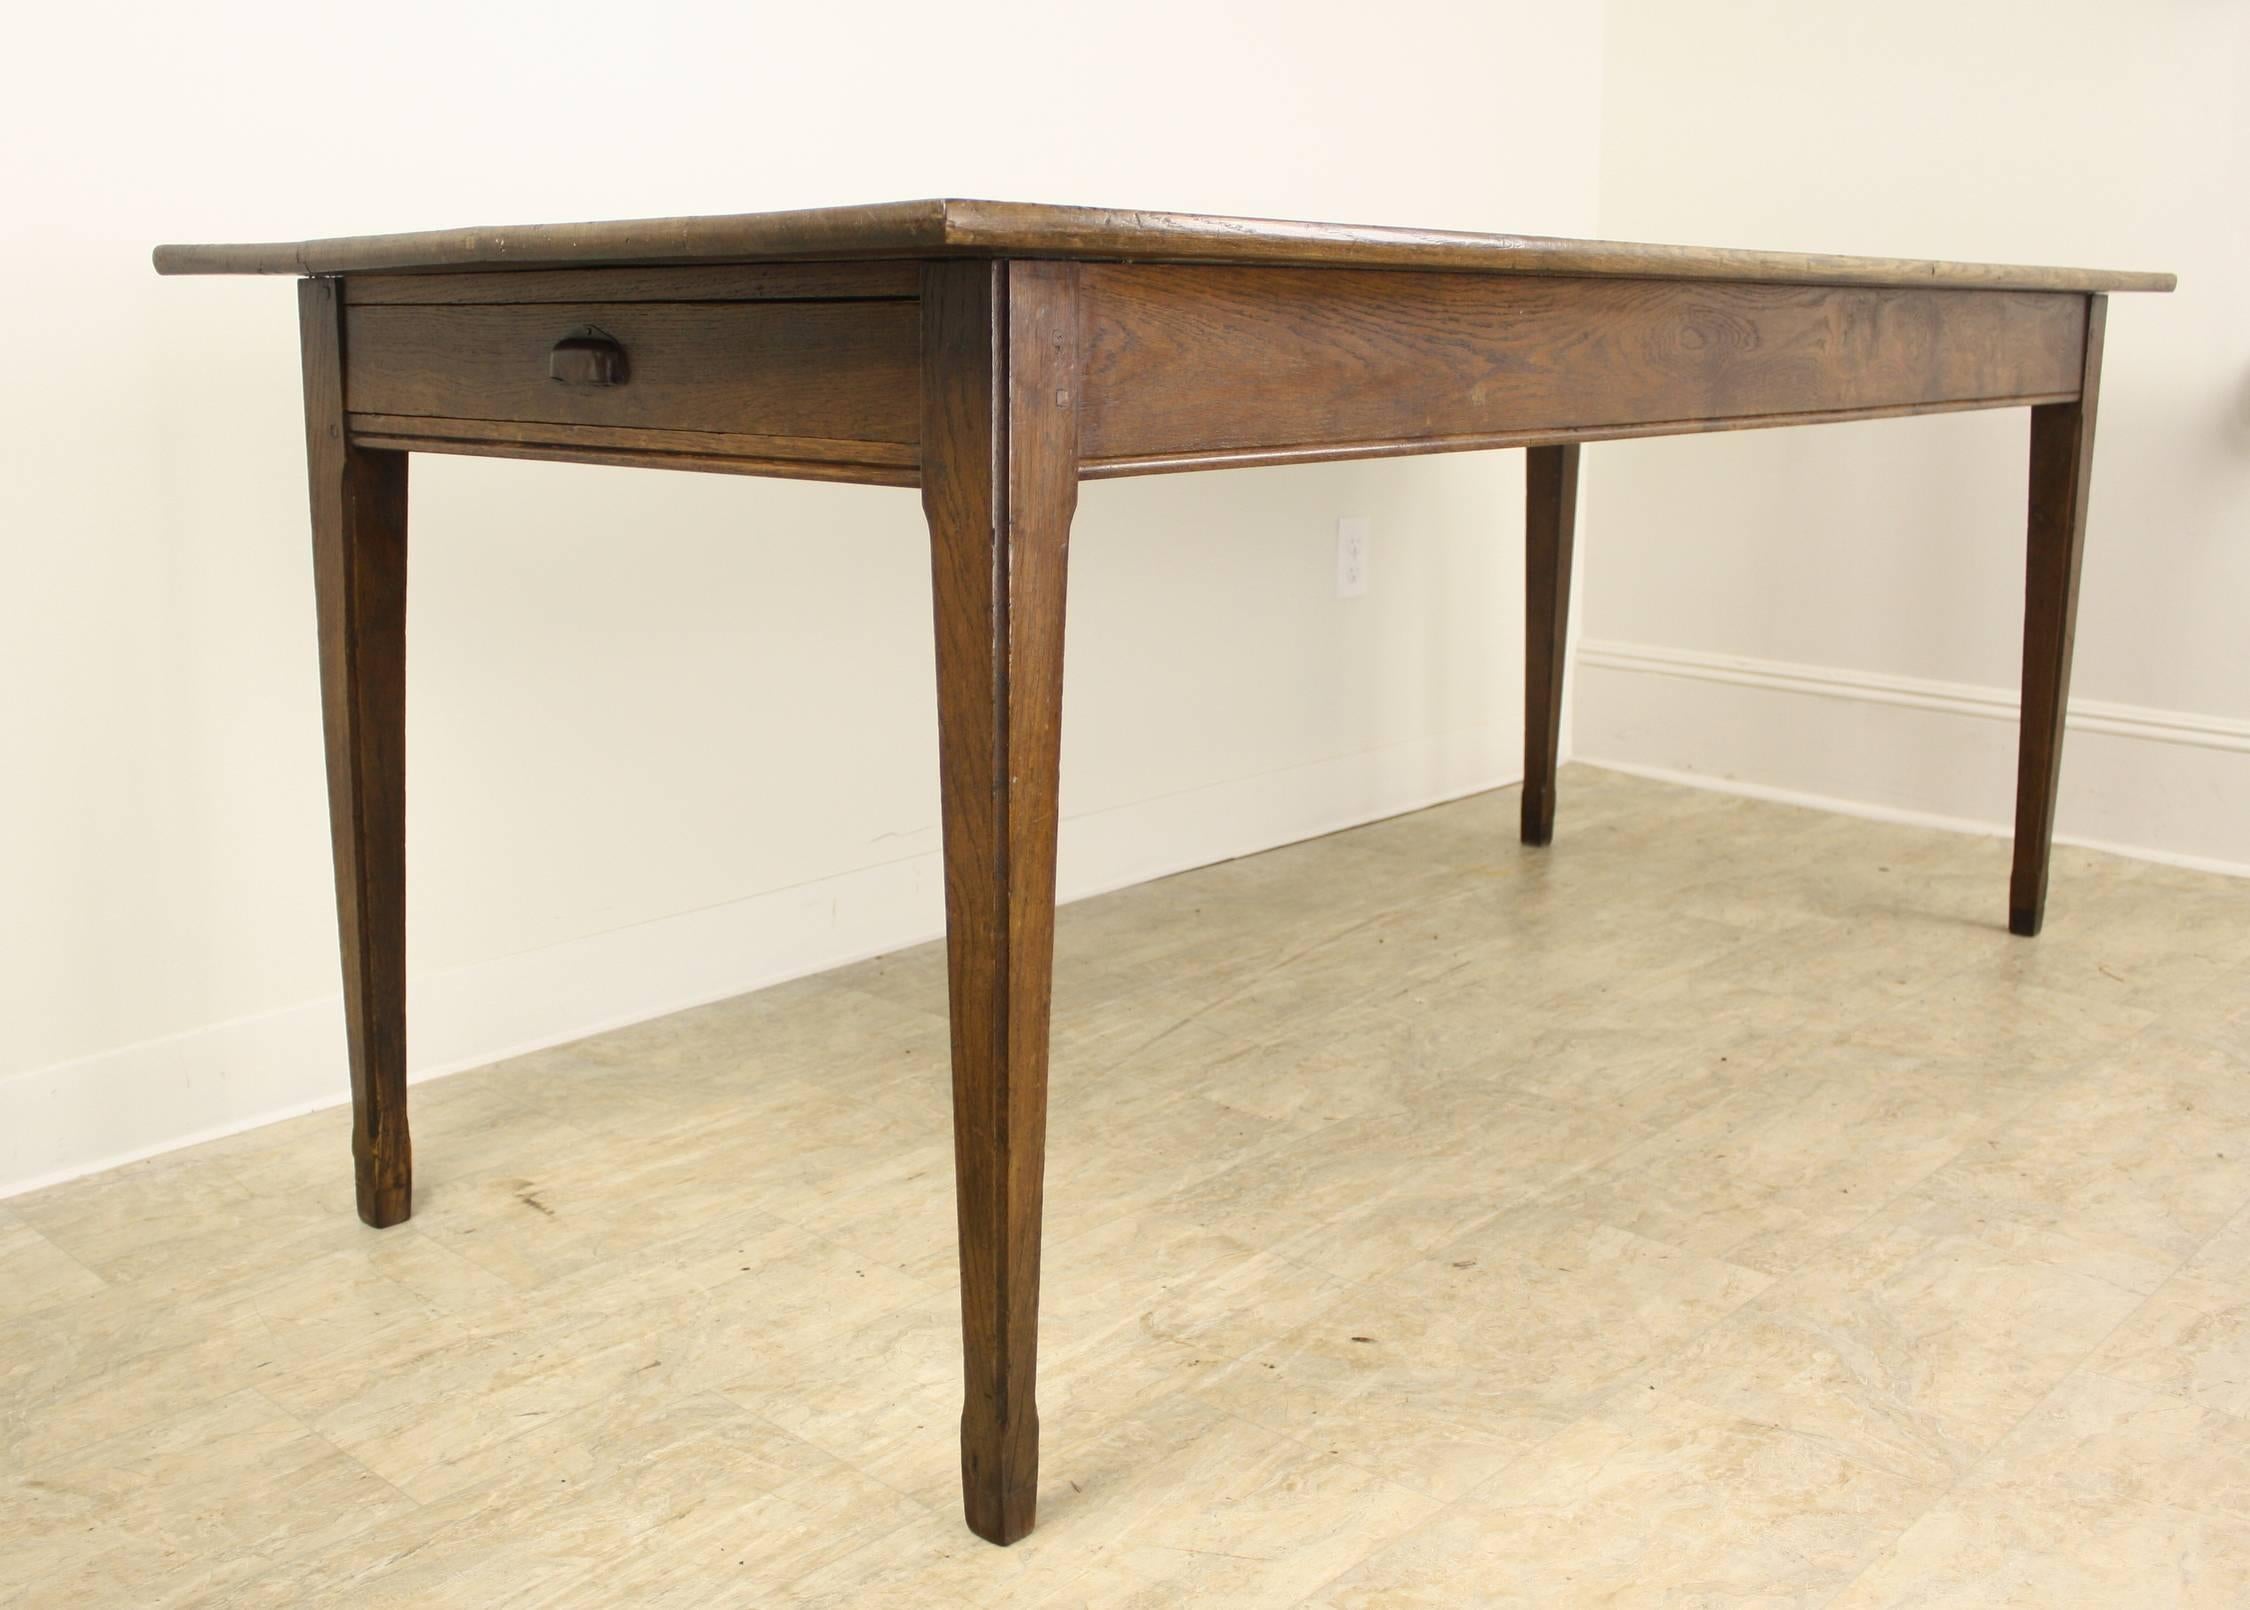 A nicely proportioned oak farm table, with routed details on the legs and apron. Very good grain, color and patina. 24.75